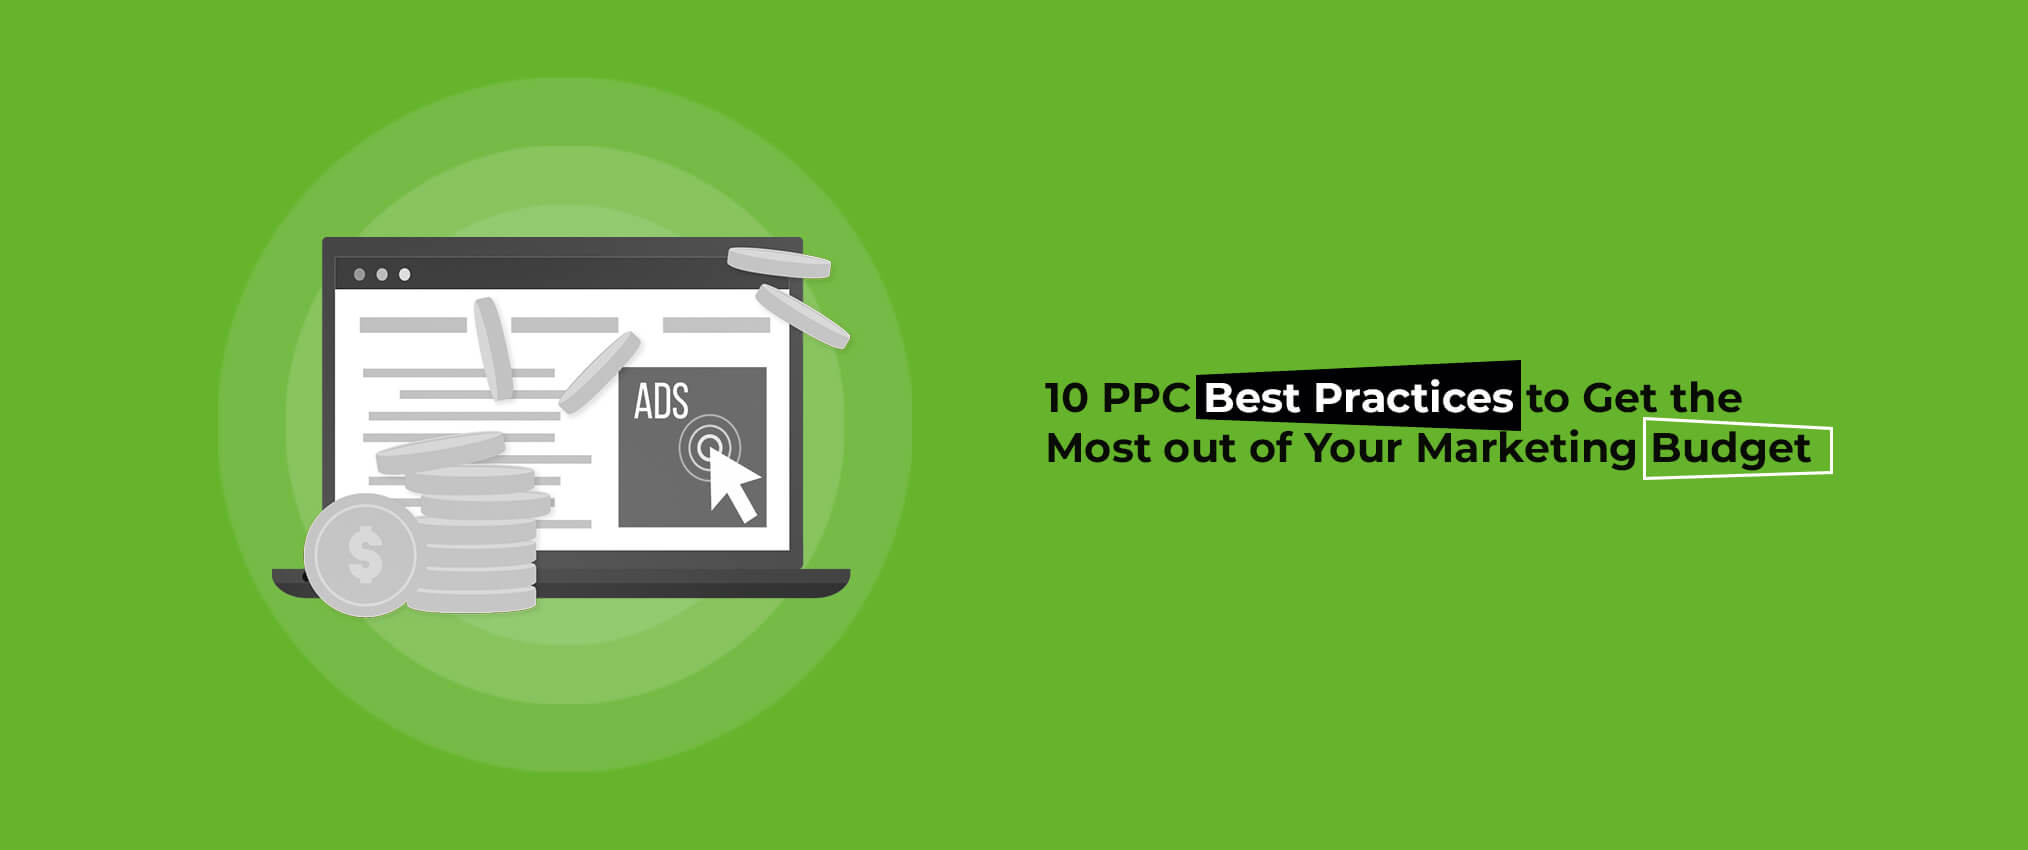 PPC Best Practices to Get the Most out of Your Marketing Budget